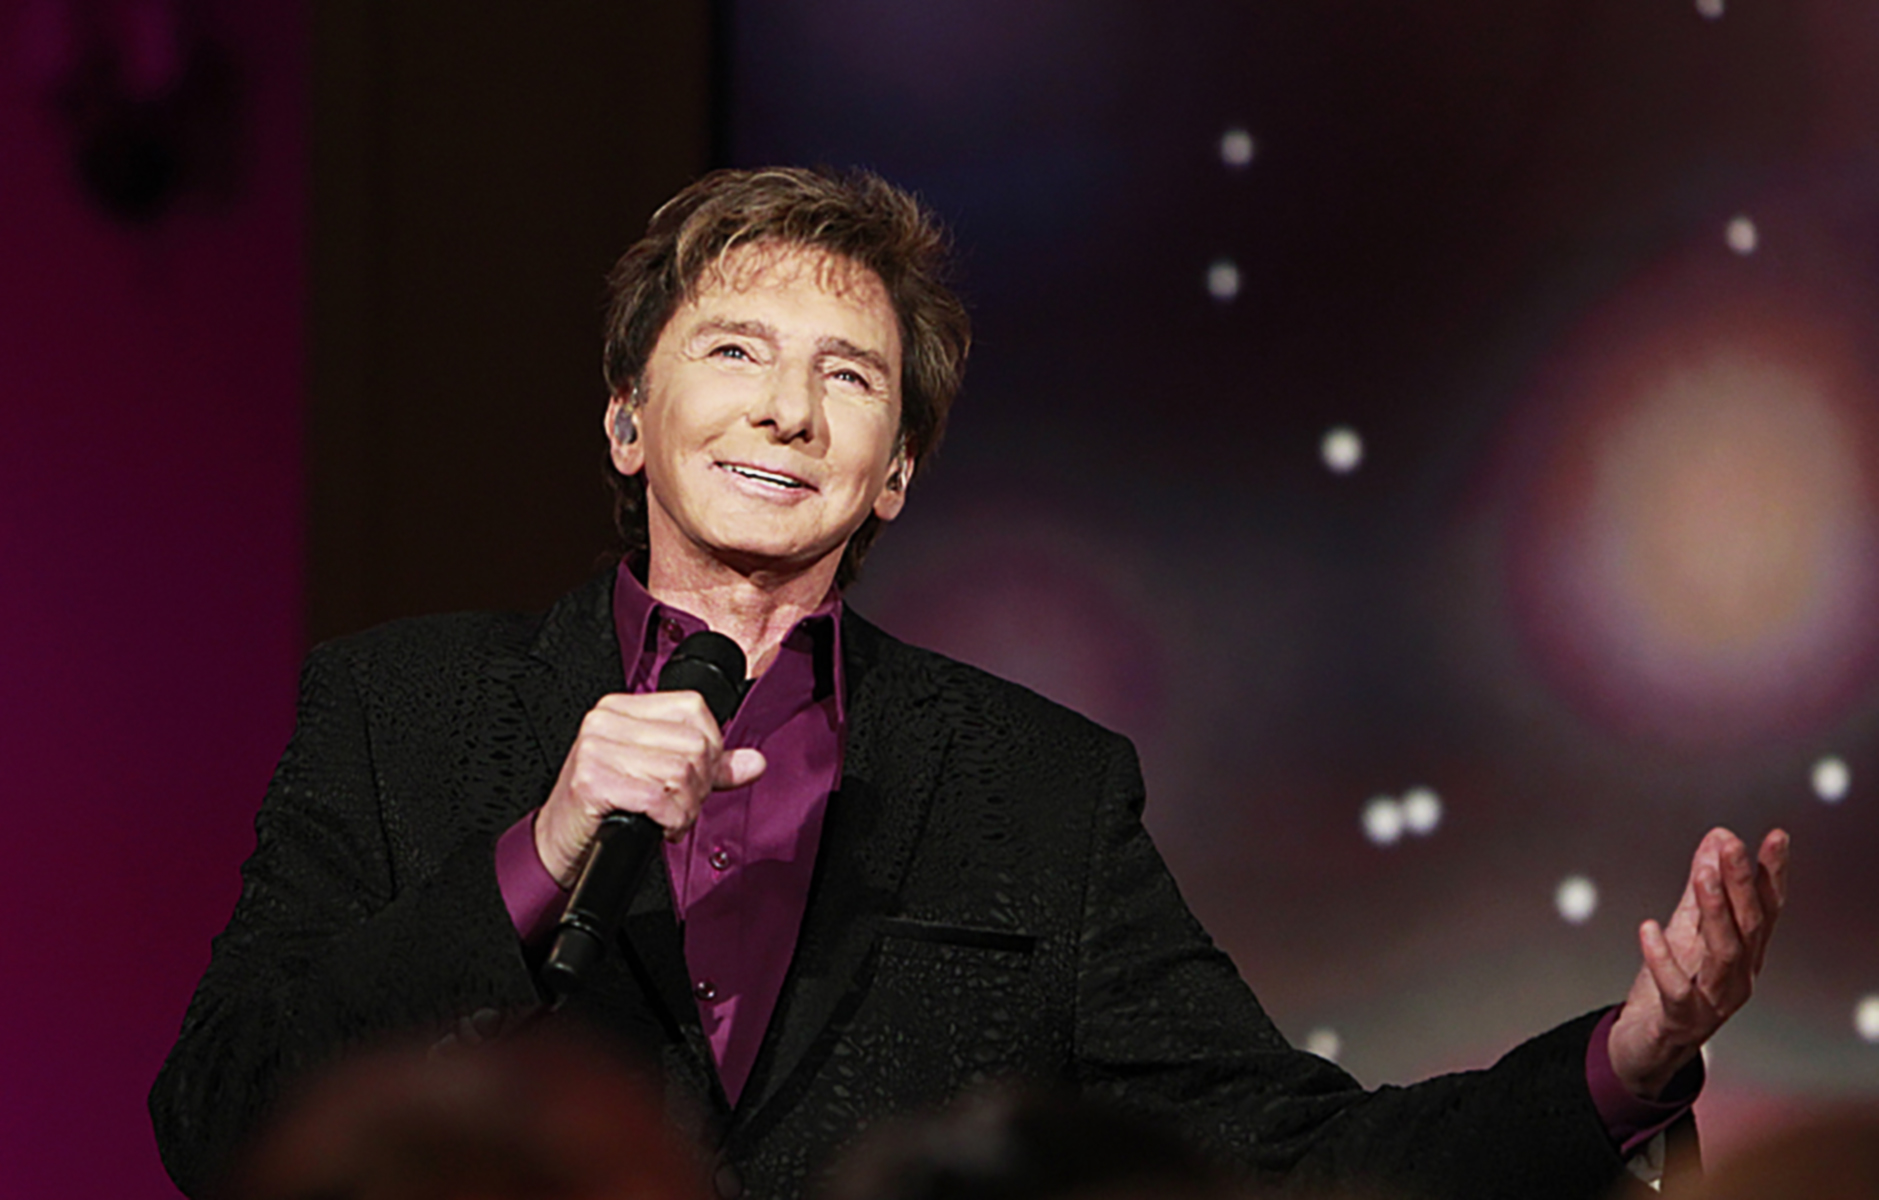 Everything We Know About Barry Manilow's Longtime Husband Garry Kief